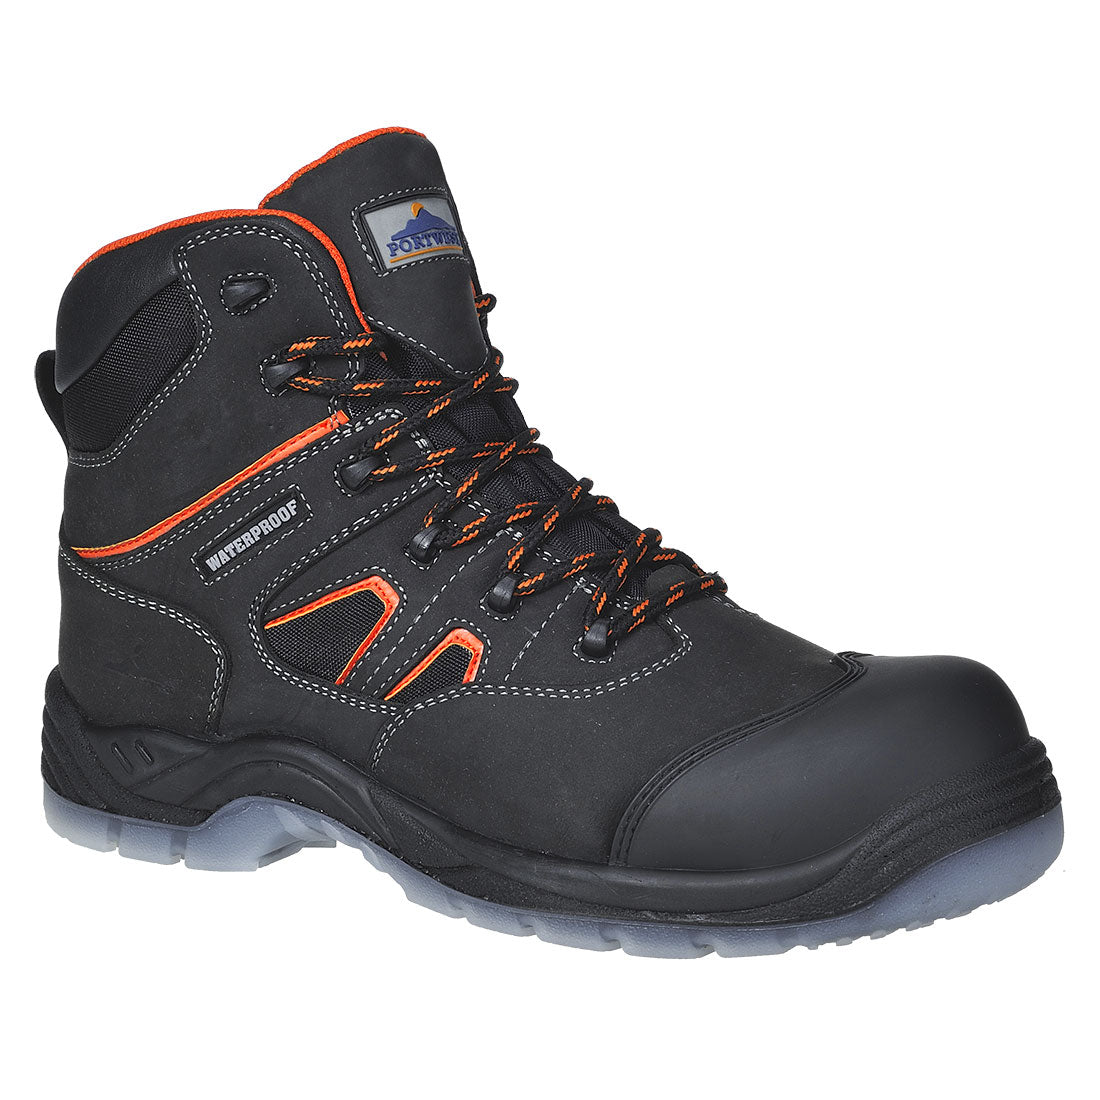 Portwest Waterproof Compositelite All Weather - Best S3 Safety Boots